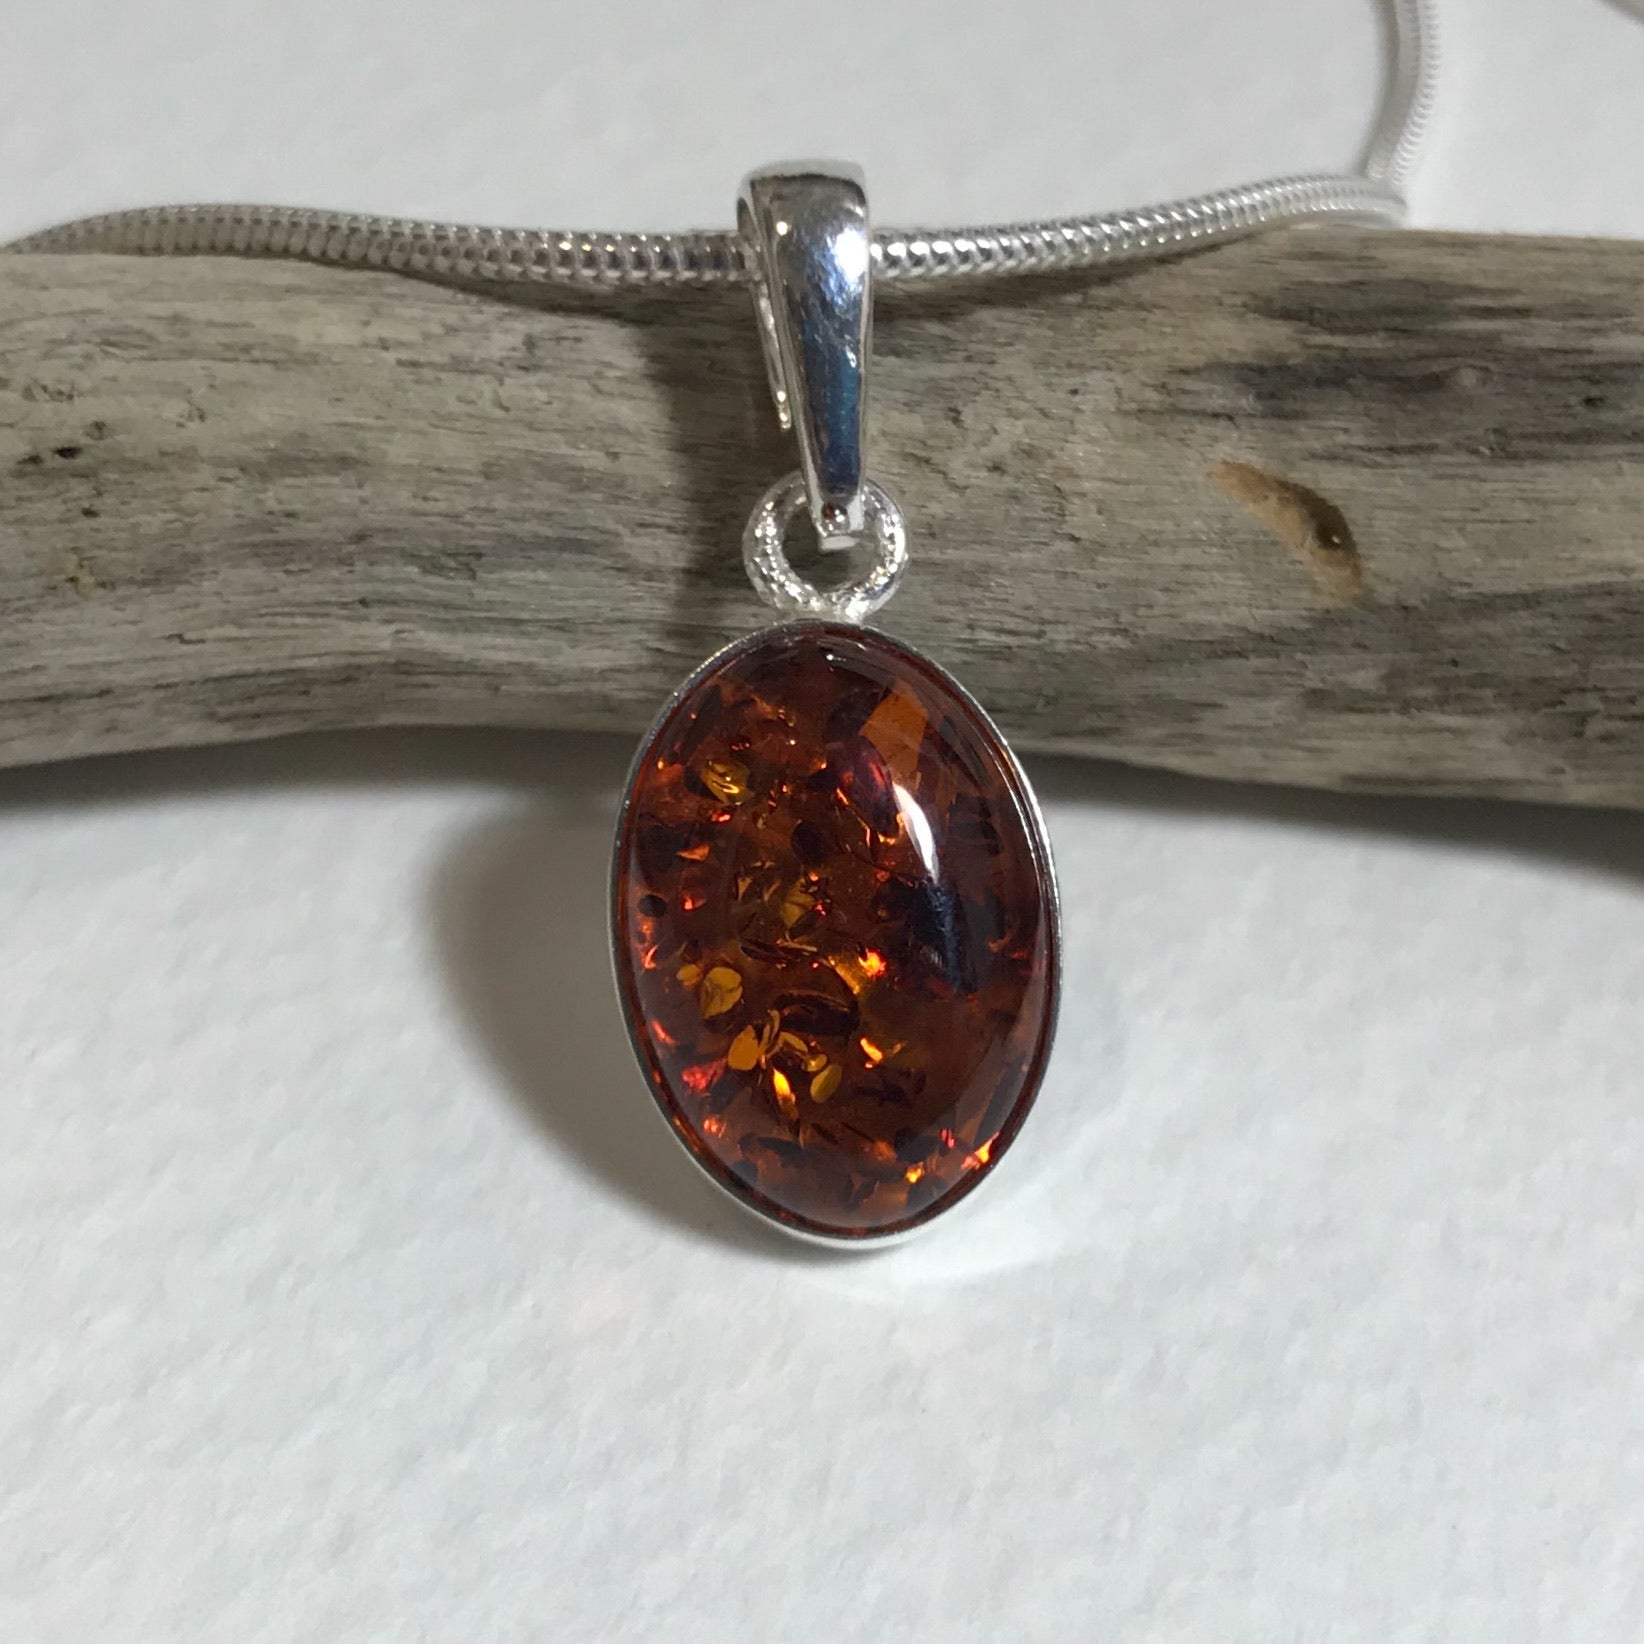 Small Oval Amber Pendant - The Nancy Smillie Shop - Art, Jewellery & Designer Gifts Glasgow